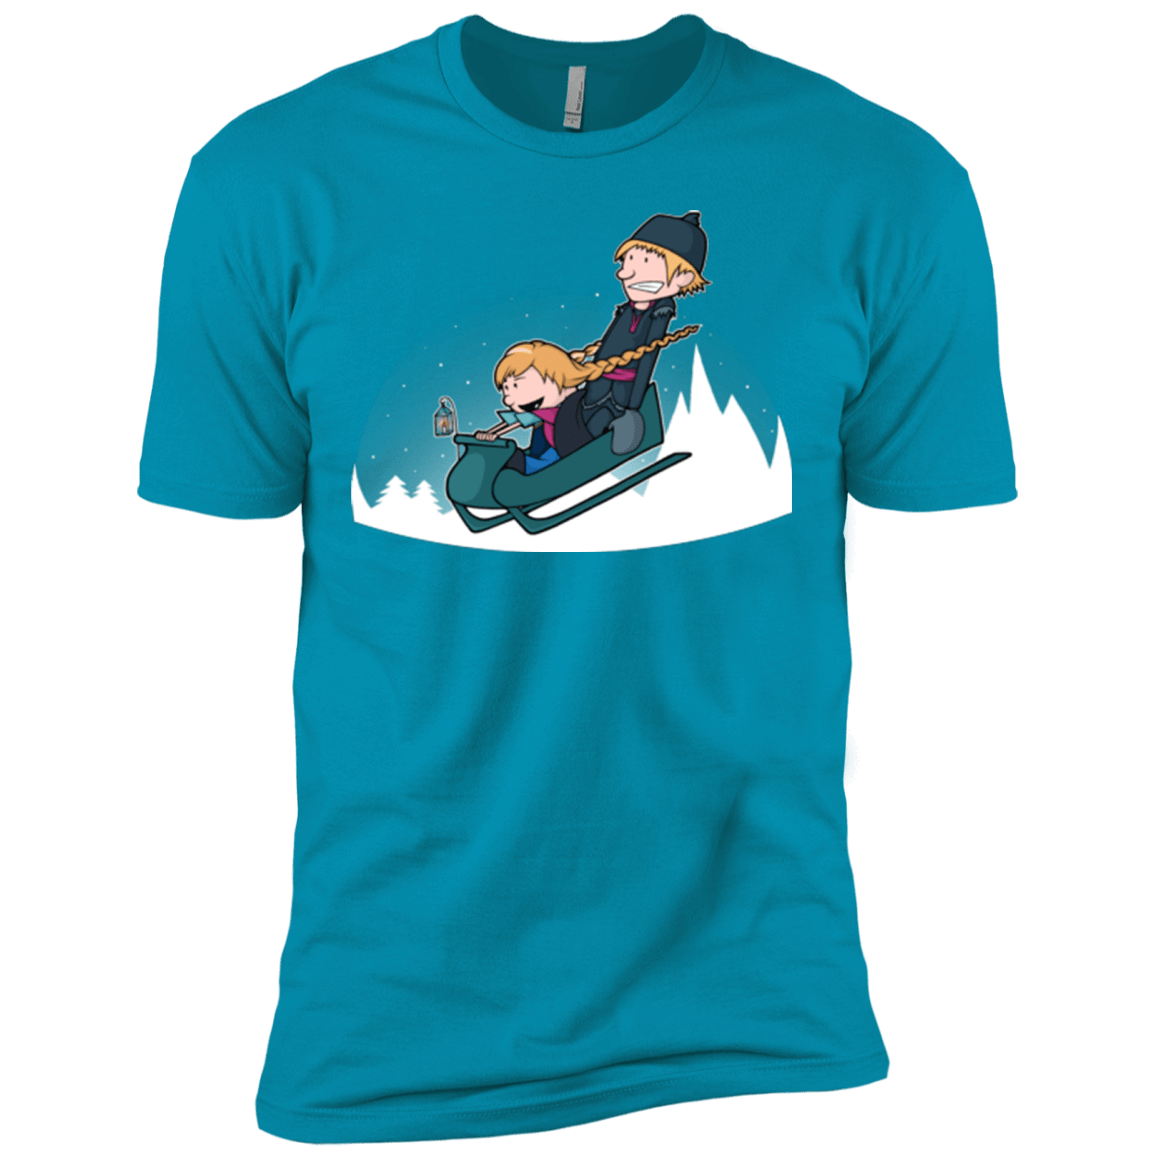 T-Shirts Turquoise / X-Small A Snowy Ride Men's Premium T-Shirt